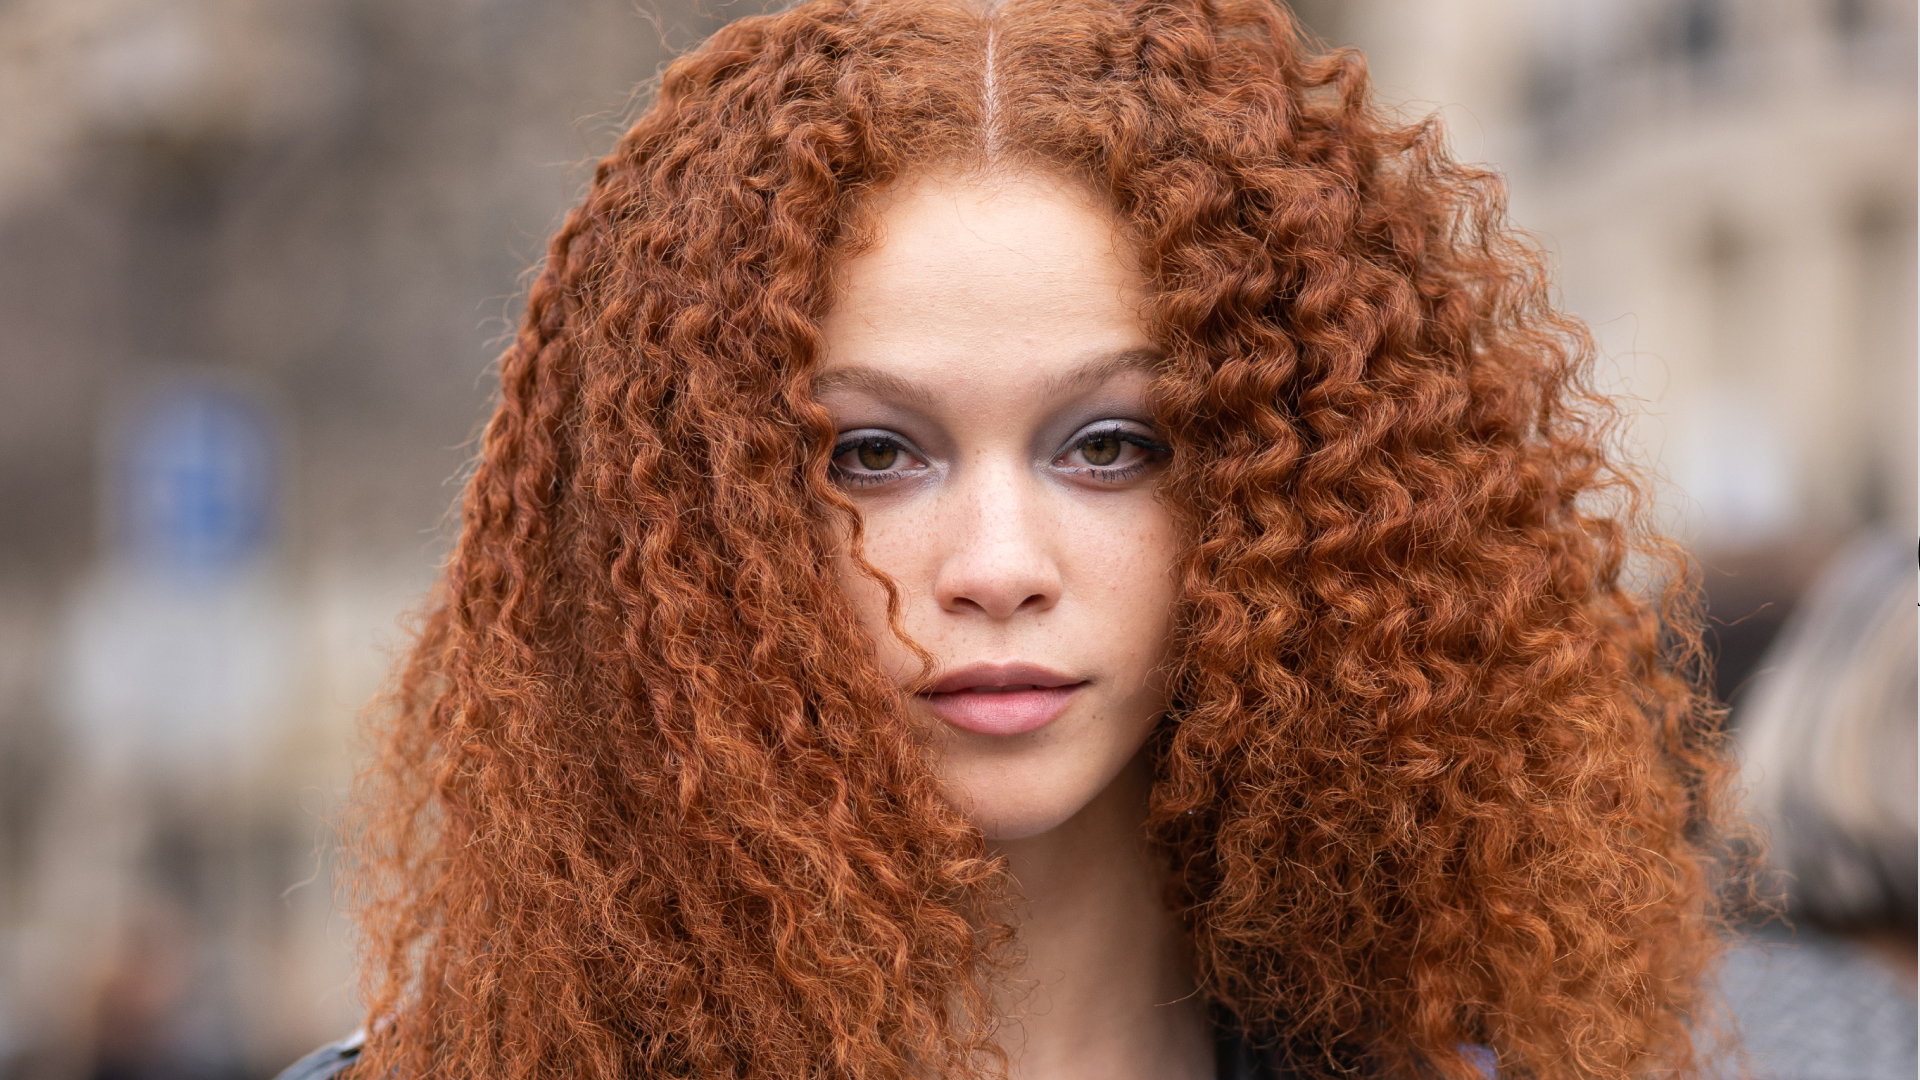 The 12 Best Leave-In Conditioners for Curly Hair, According to Hair Experts and Editors